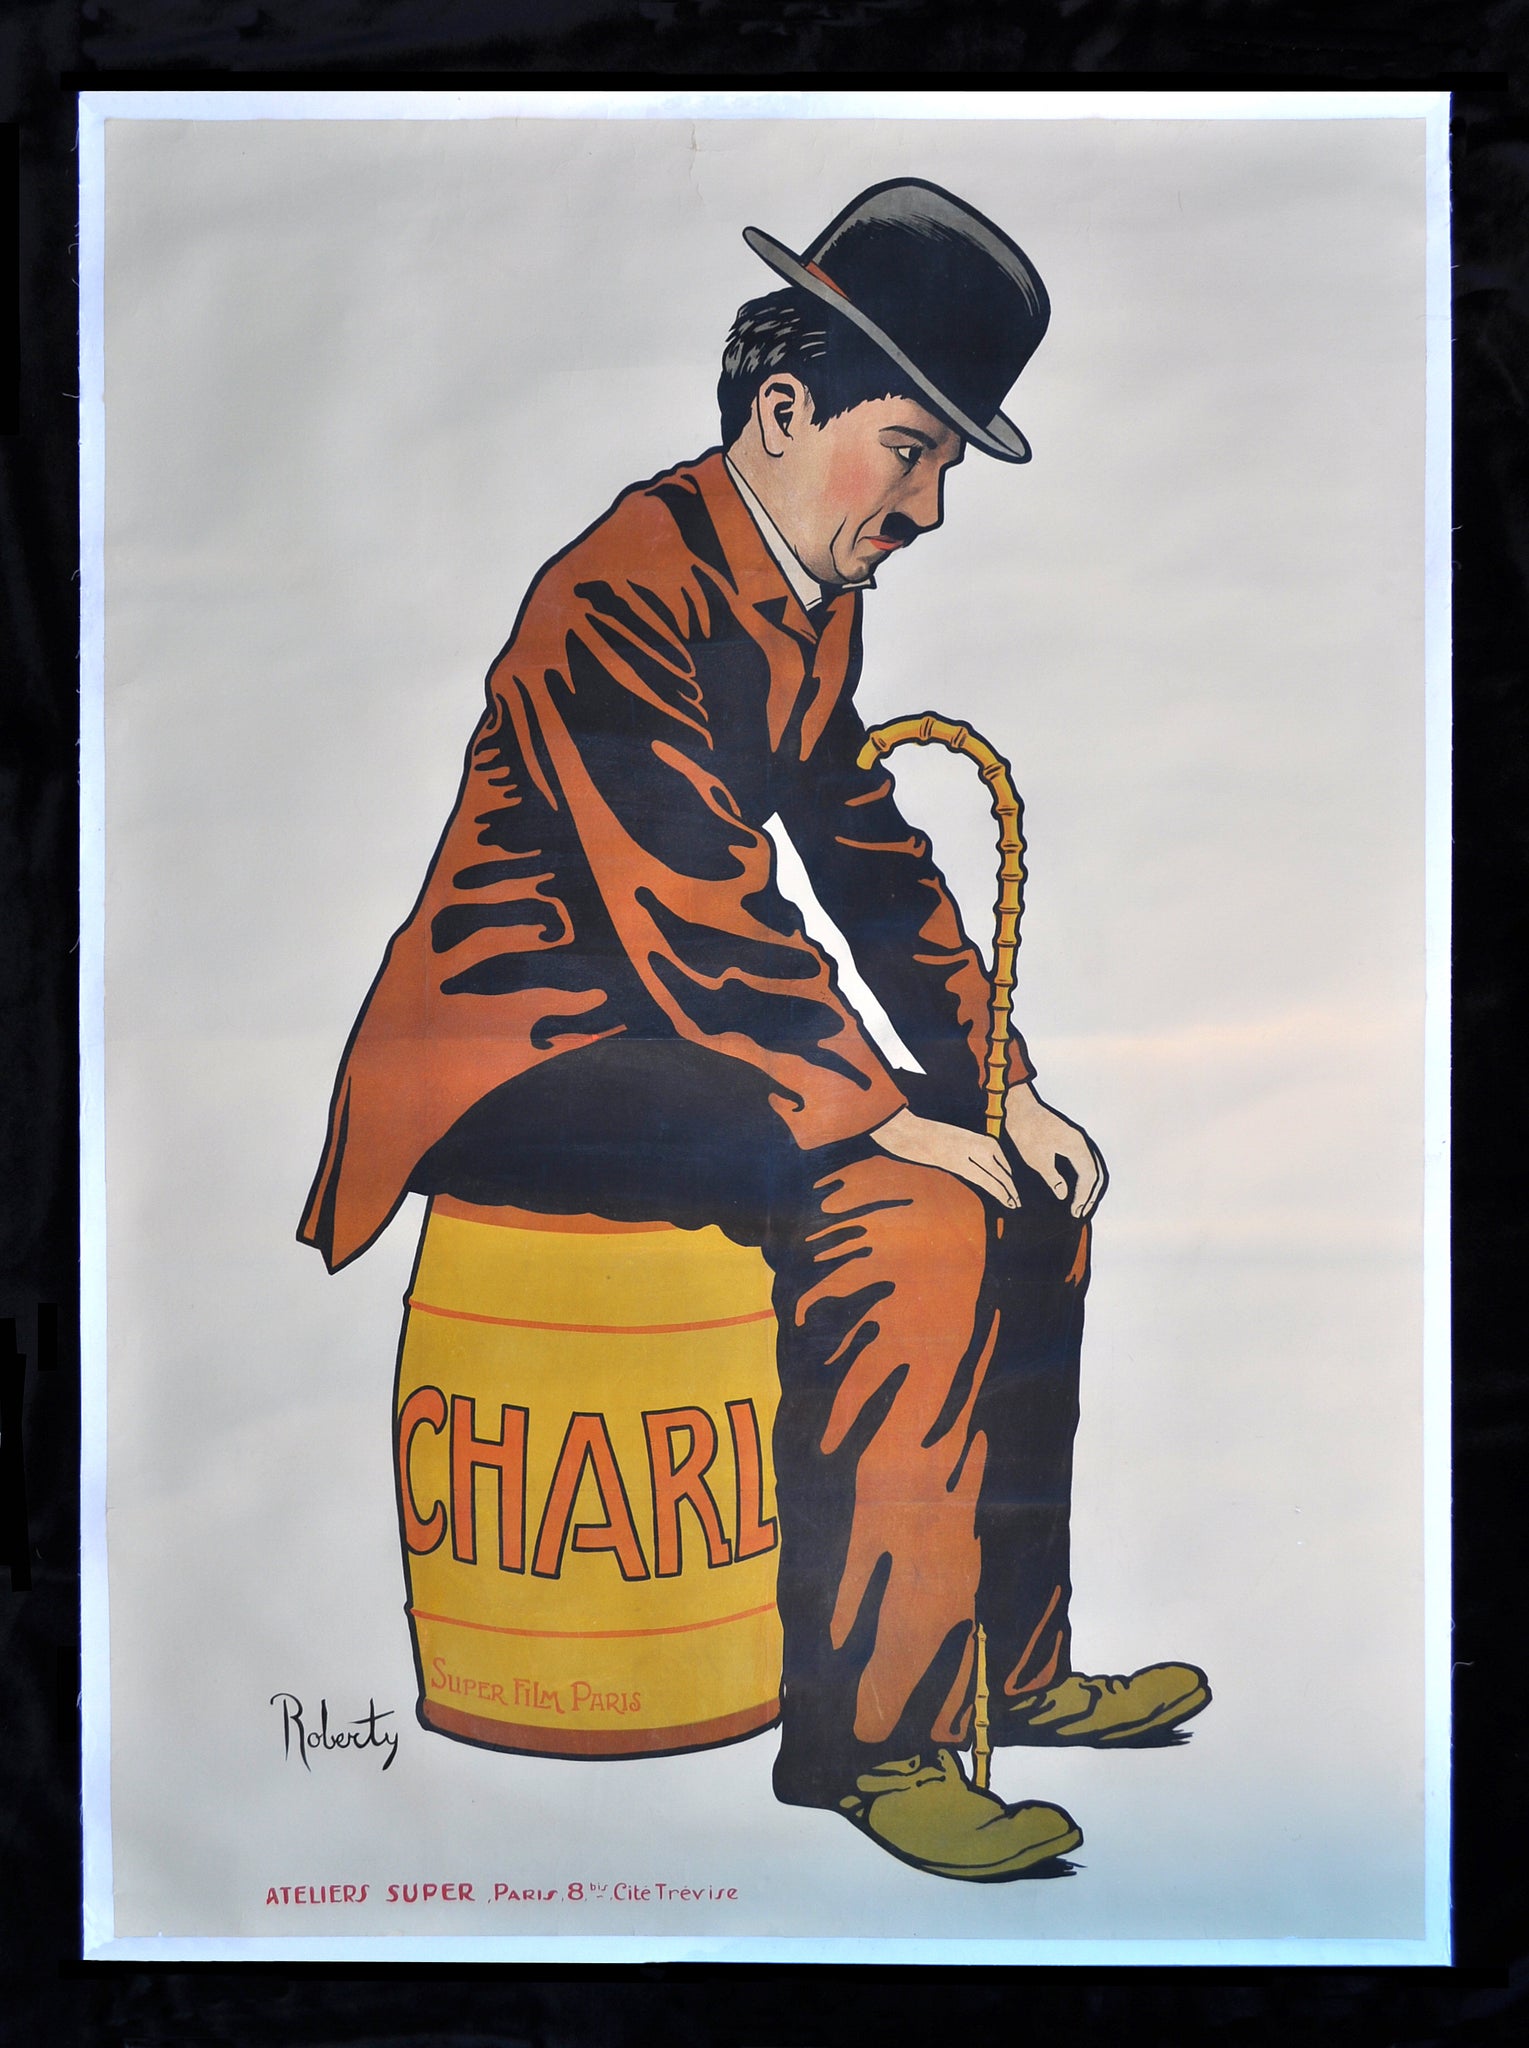 This is a vintage poster of English comic actor and filmmaker, Charlie Chaplin. It was designed by artist 'Roberty' to promote Chaplin's 1917 French film, 'Charlot'. Charlie Chaplin has left a huge legacy behind as one of the greatest comic writers and actors of all time and was a pioneer in the silent film era.